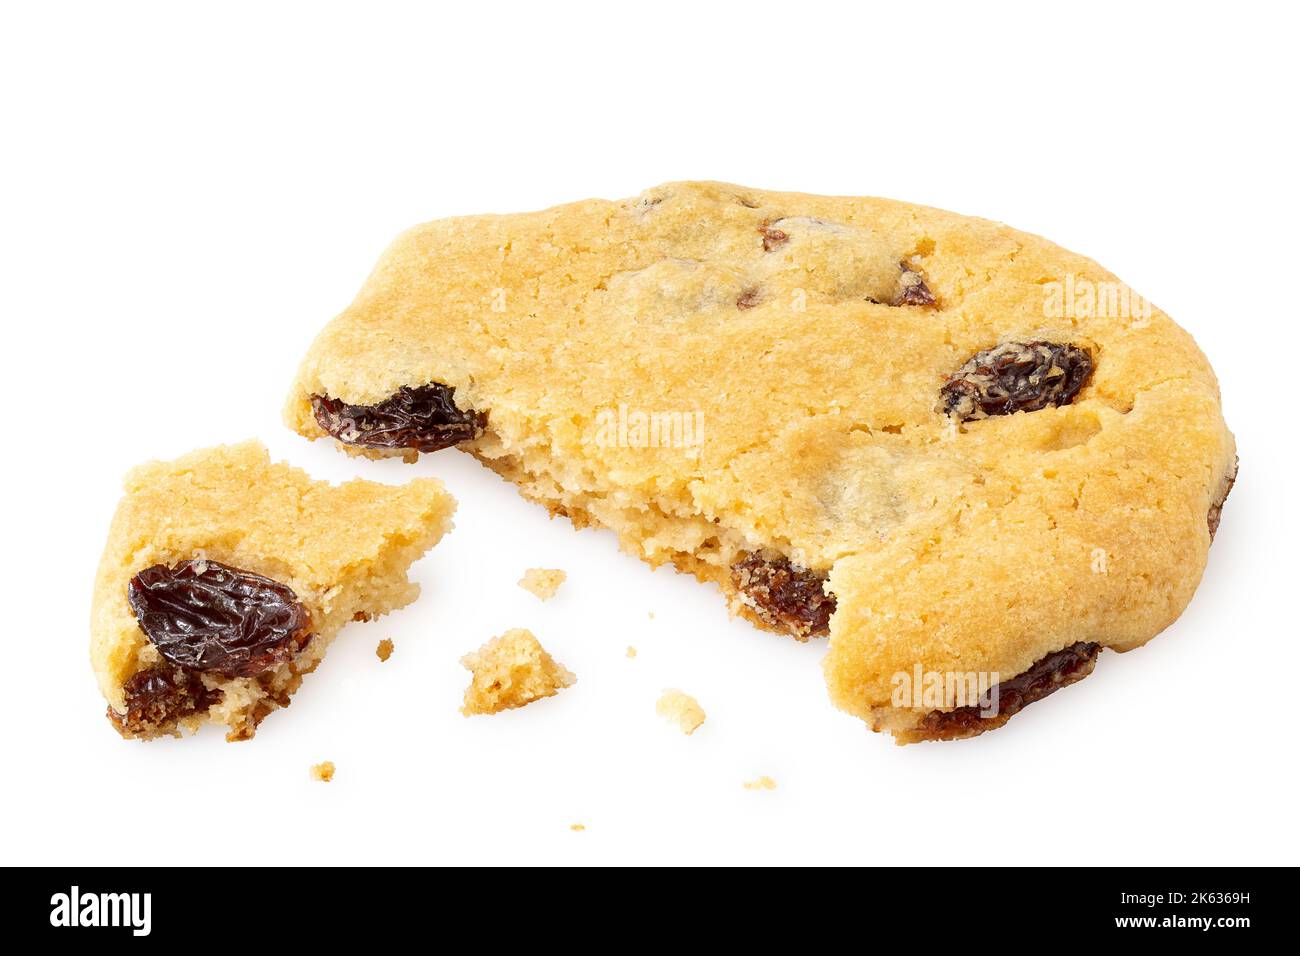 Partially eaten all butter sultana cookie with crumbs isolated on white. Stock Photo